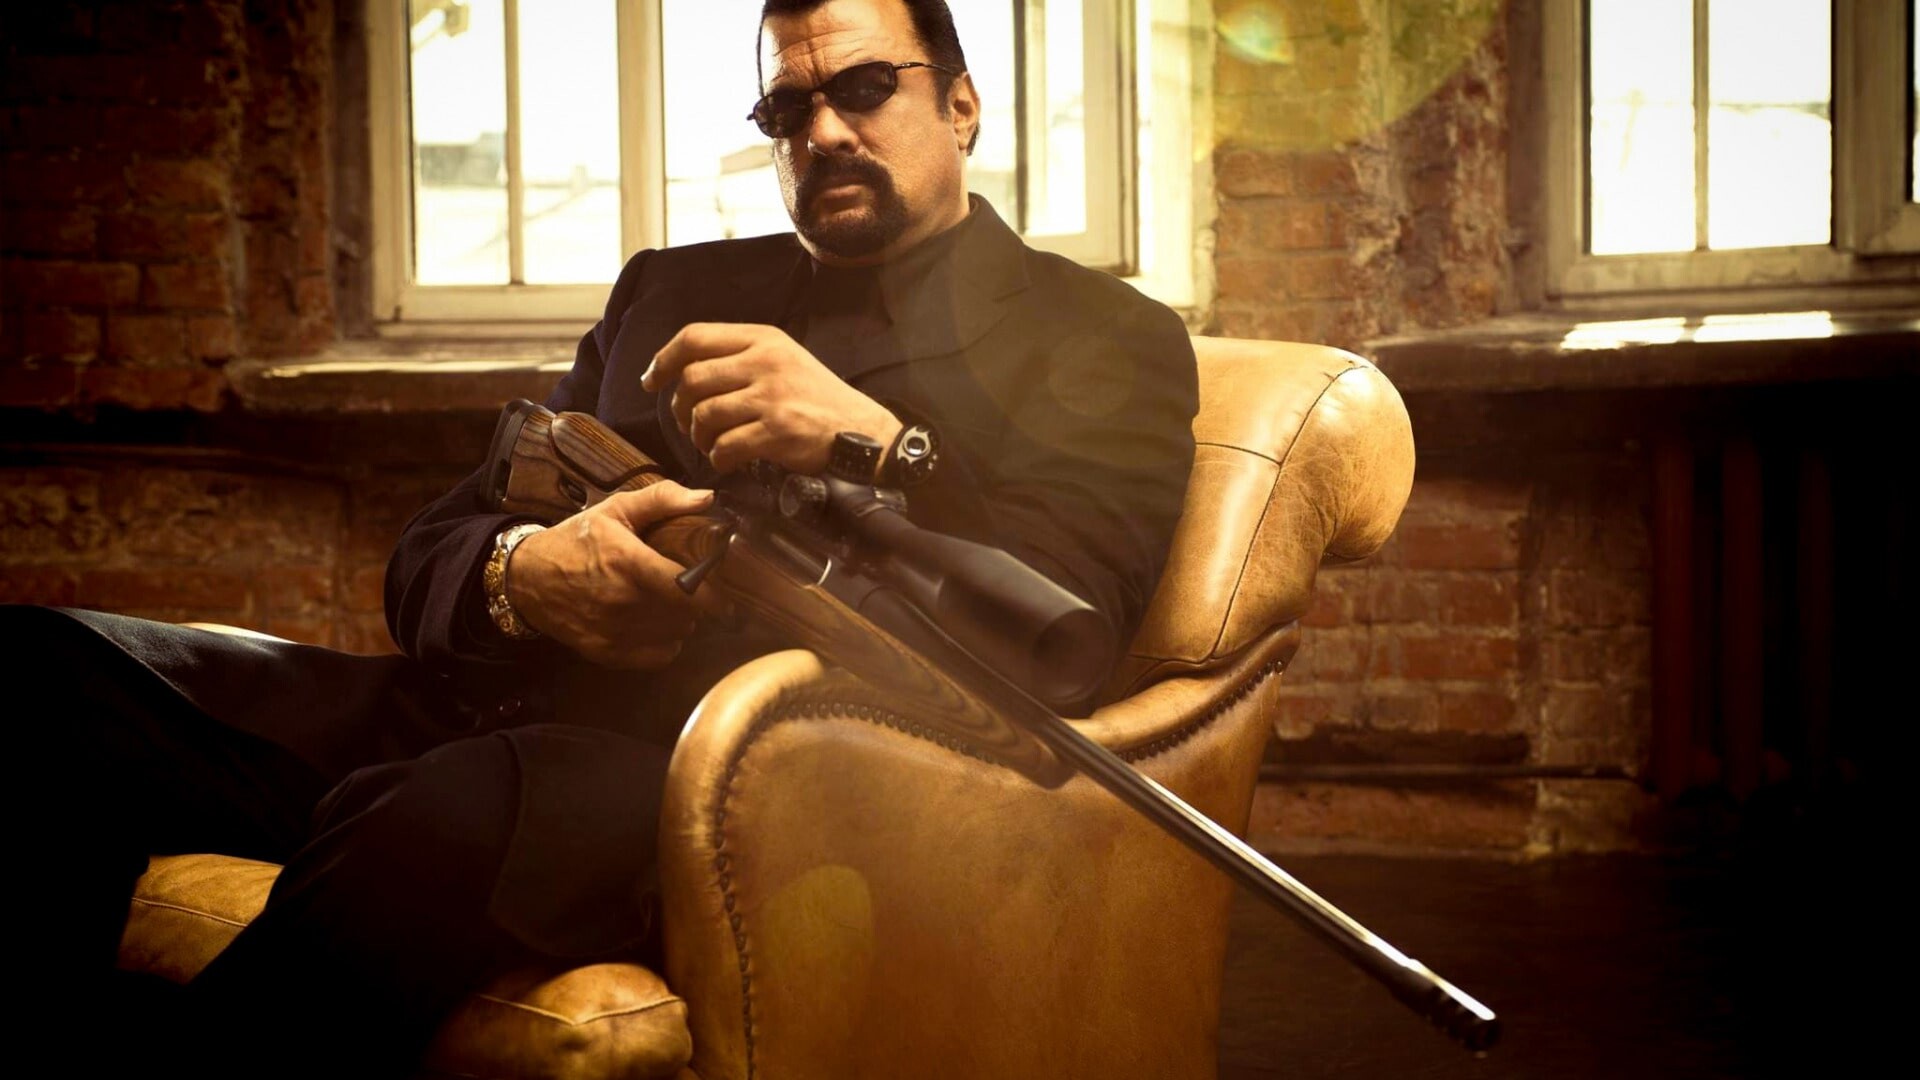 Steven Seagal: An American actor, film producer, 2011, American television action series entitled True Justice. 1920x1080 Full HD Wallpaper.